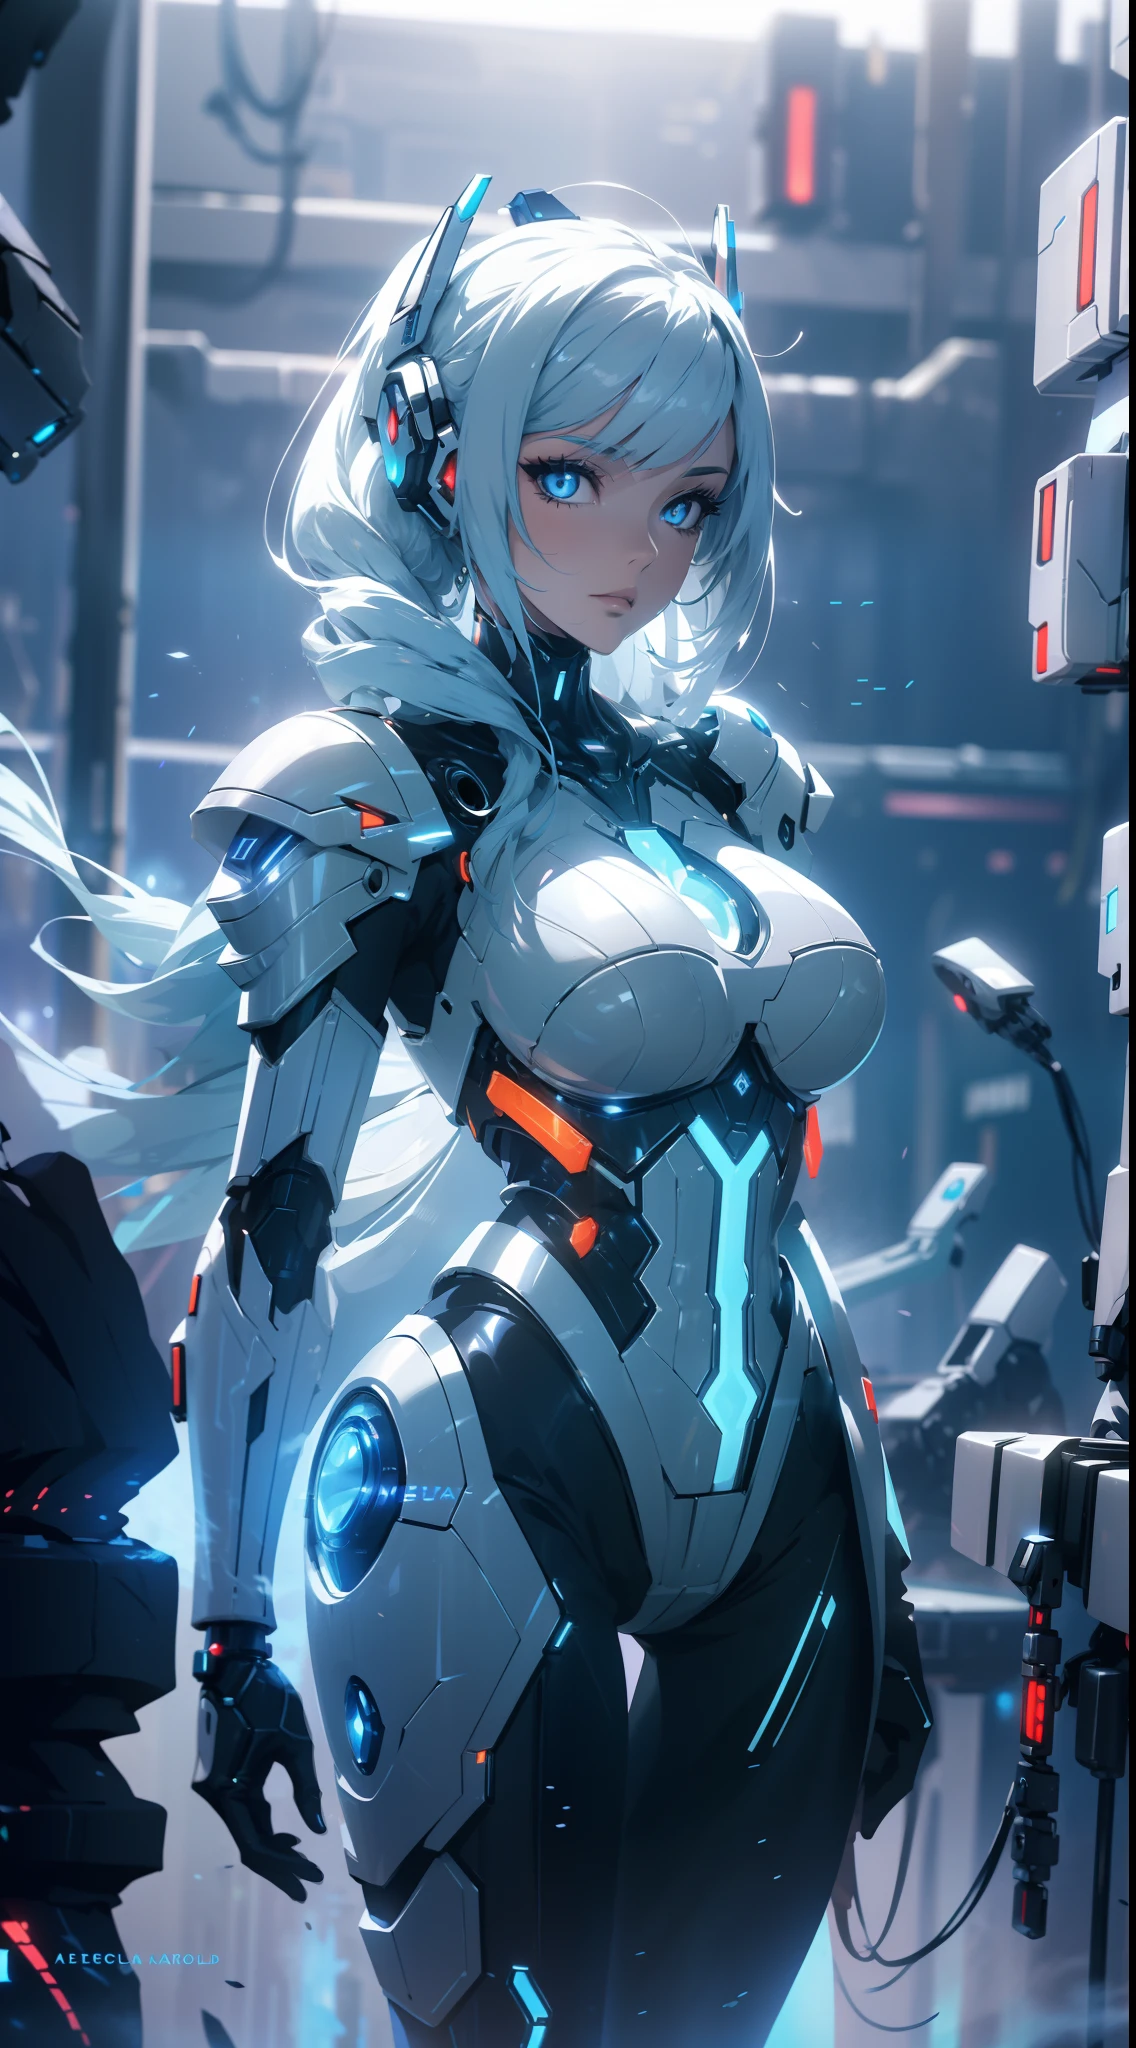 Arafed Woman in futuristic costume posing for photo, in futuristic white armor, Girl in Mecha Cyber Armor, unreal engine rendering + a goddess, Cyborg porcelain armor, Shiny White Armor, gynoid cyborg body, Beautiful and attractive cyborg woman, diverse cybersuits, Beautiful cyborg woman, beutiful white girl cyborg, With futuristic armor, The Perfect Cyborg Woman